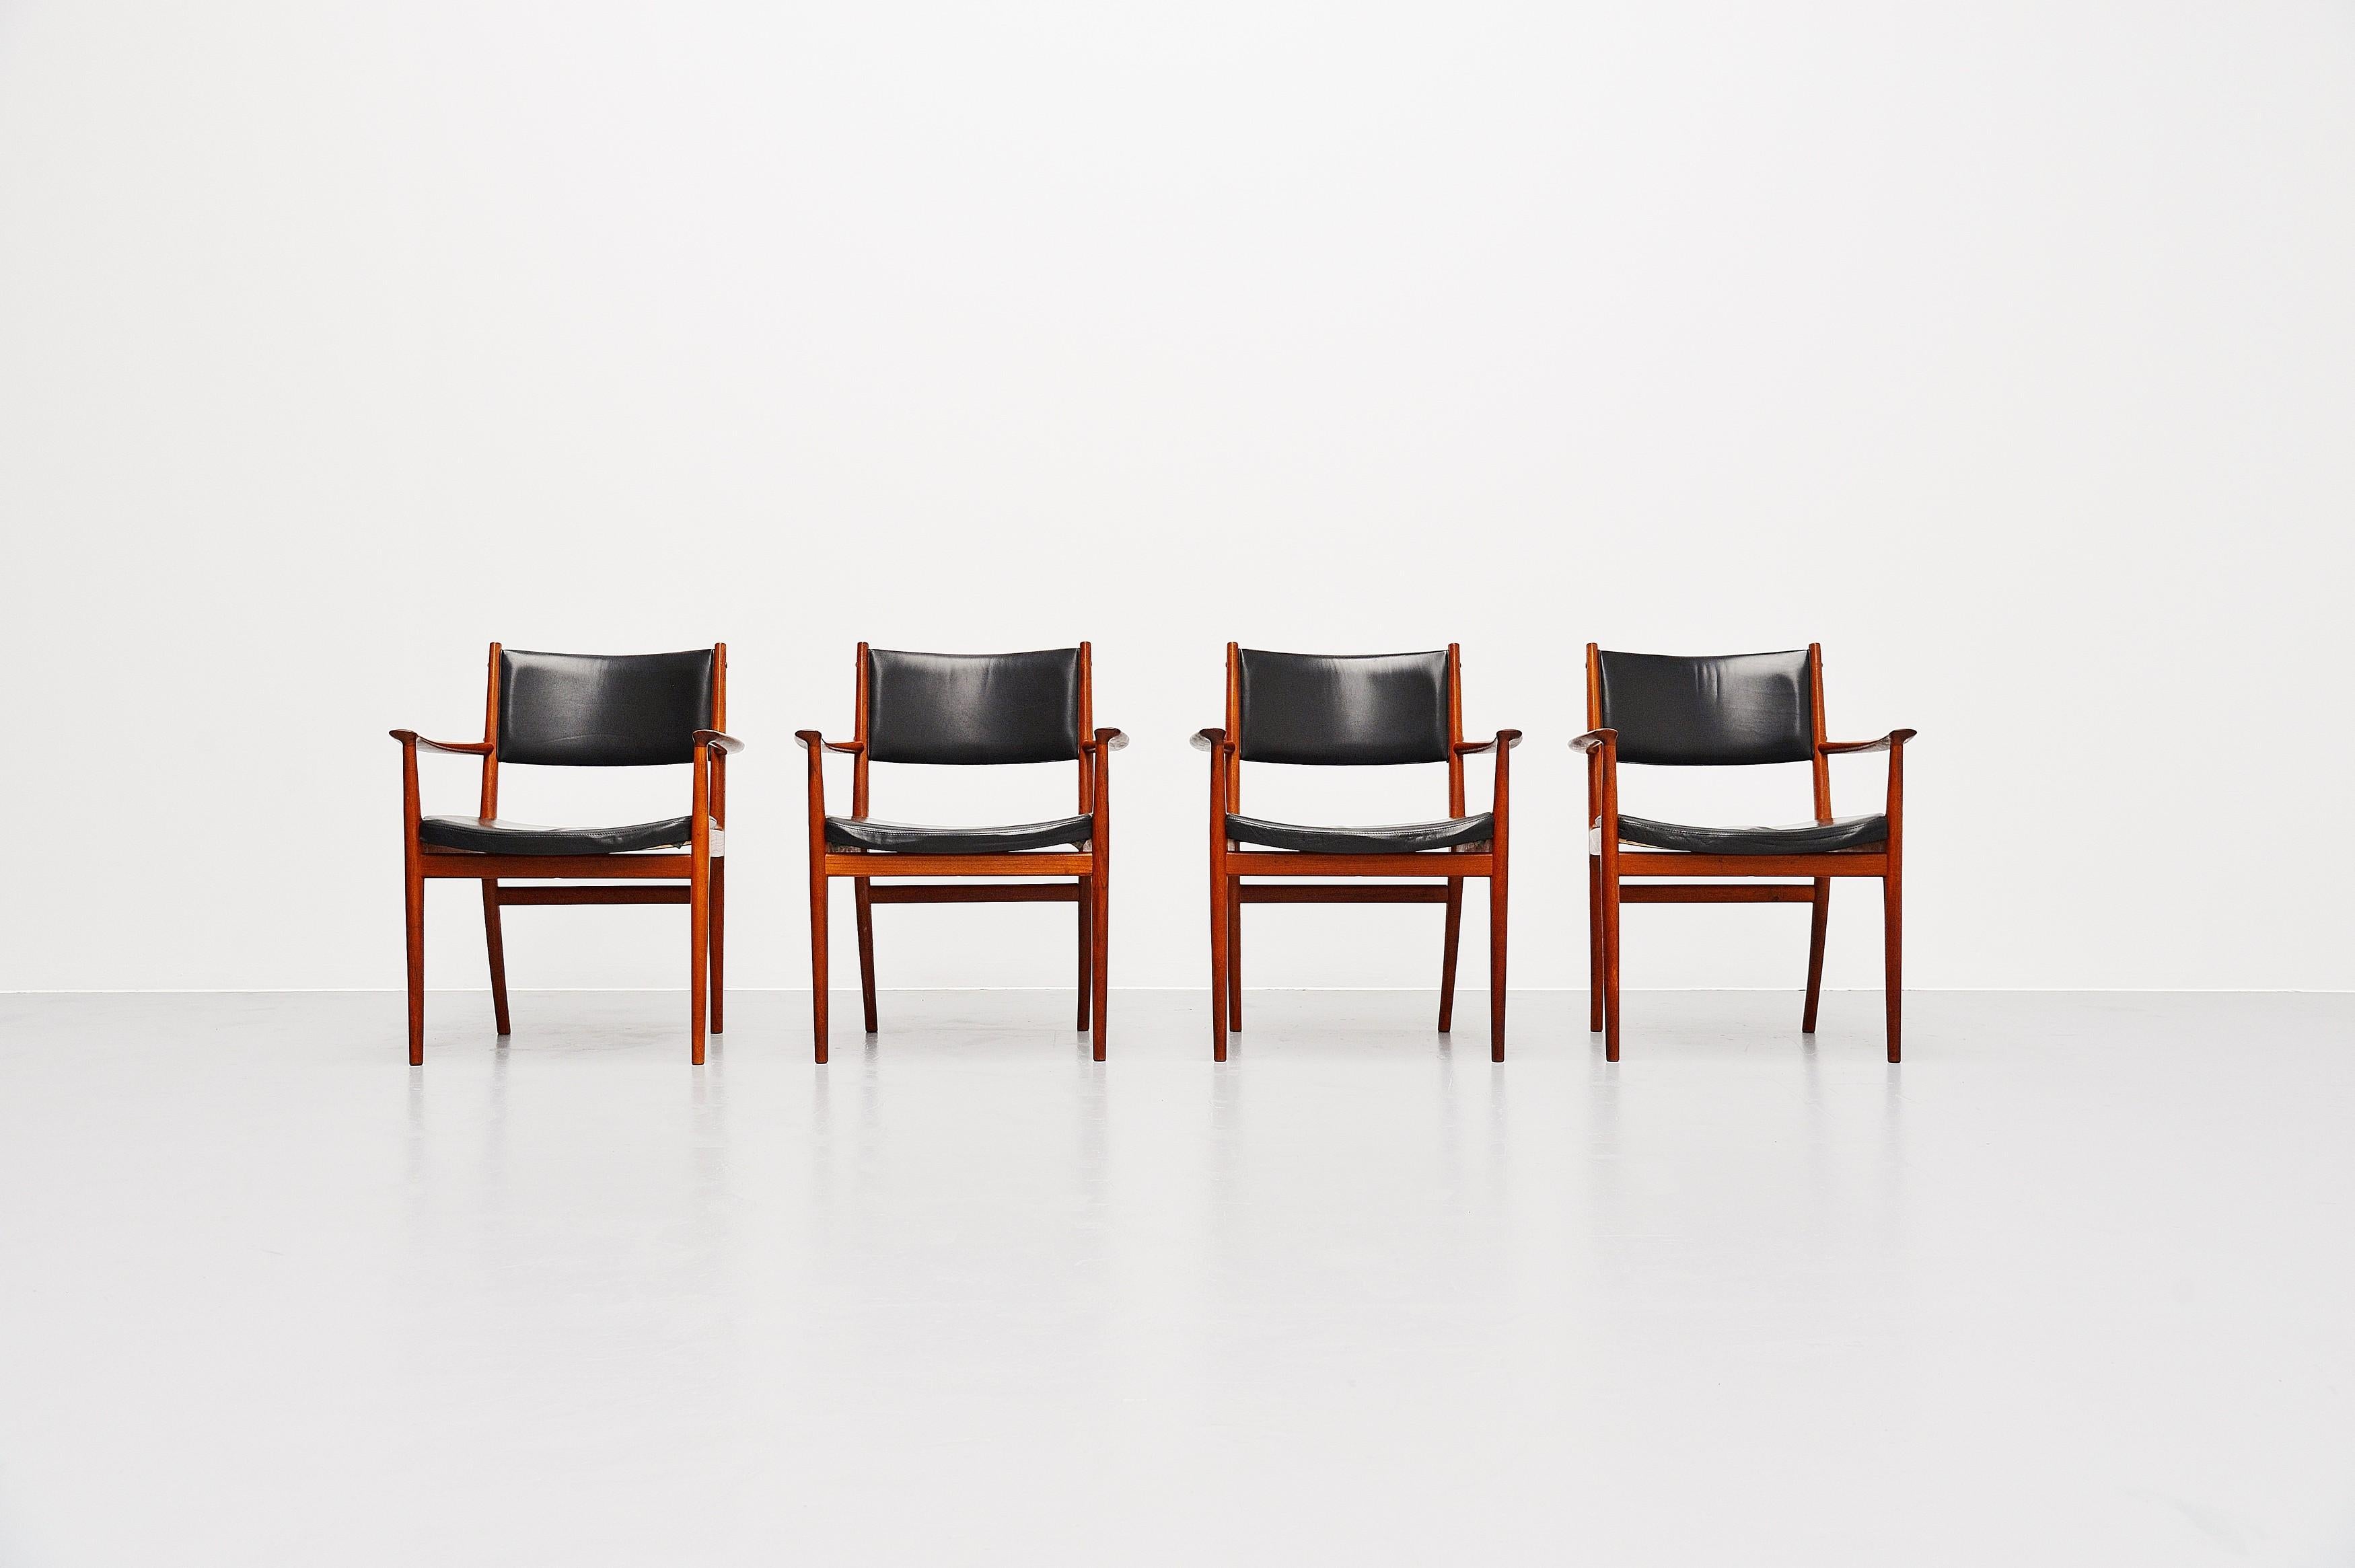 Nice shaped set of 4 armchairs designed by Kai Lyngeldt Larsen and manufactured by Soren Willadsen, Denmark, 1960. The chairs have a solid teak frame and original black leather upholstery with nice patina from age and usage but no damages. The